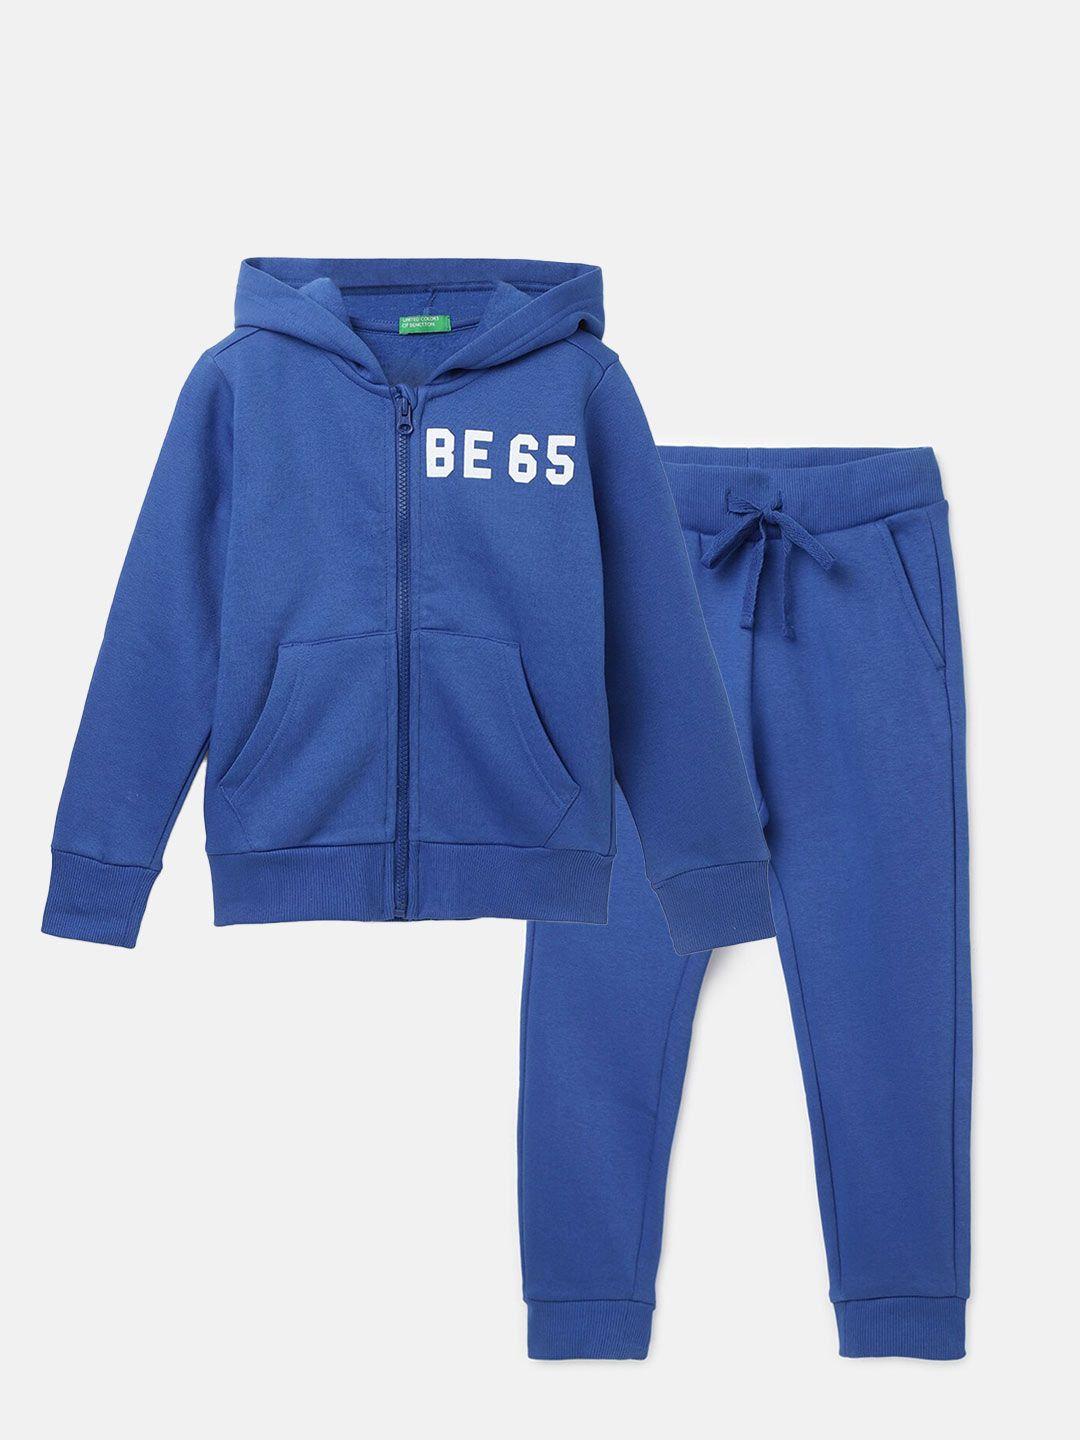 united colors of benetton boys hooded sweatshirt and joggers